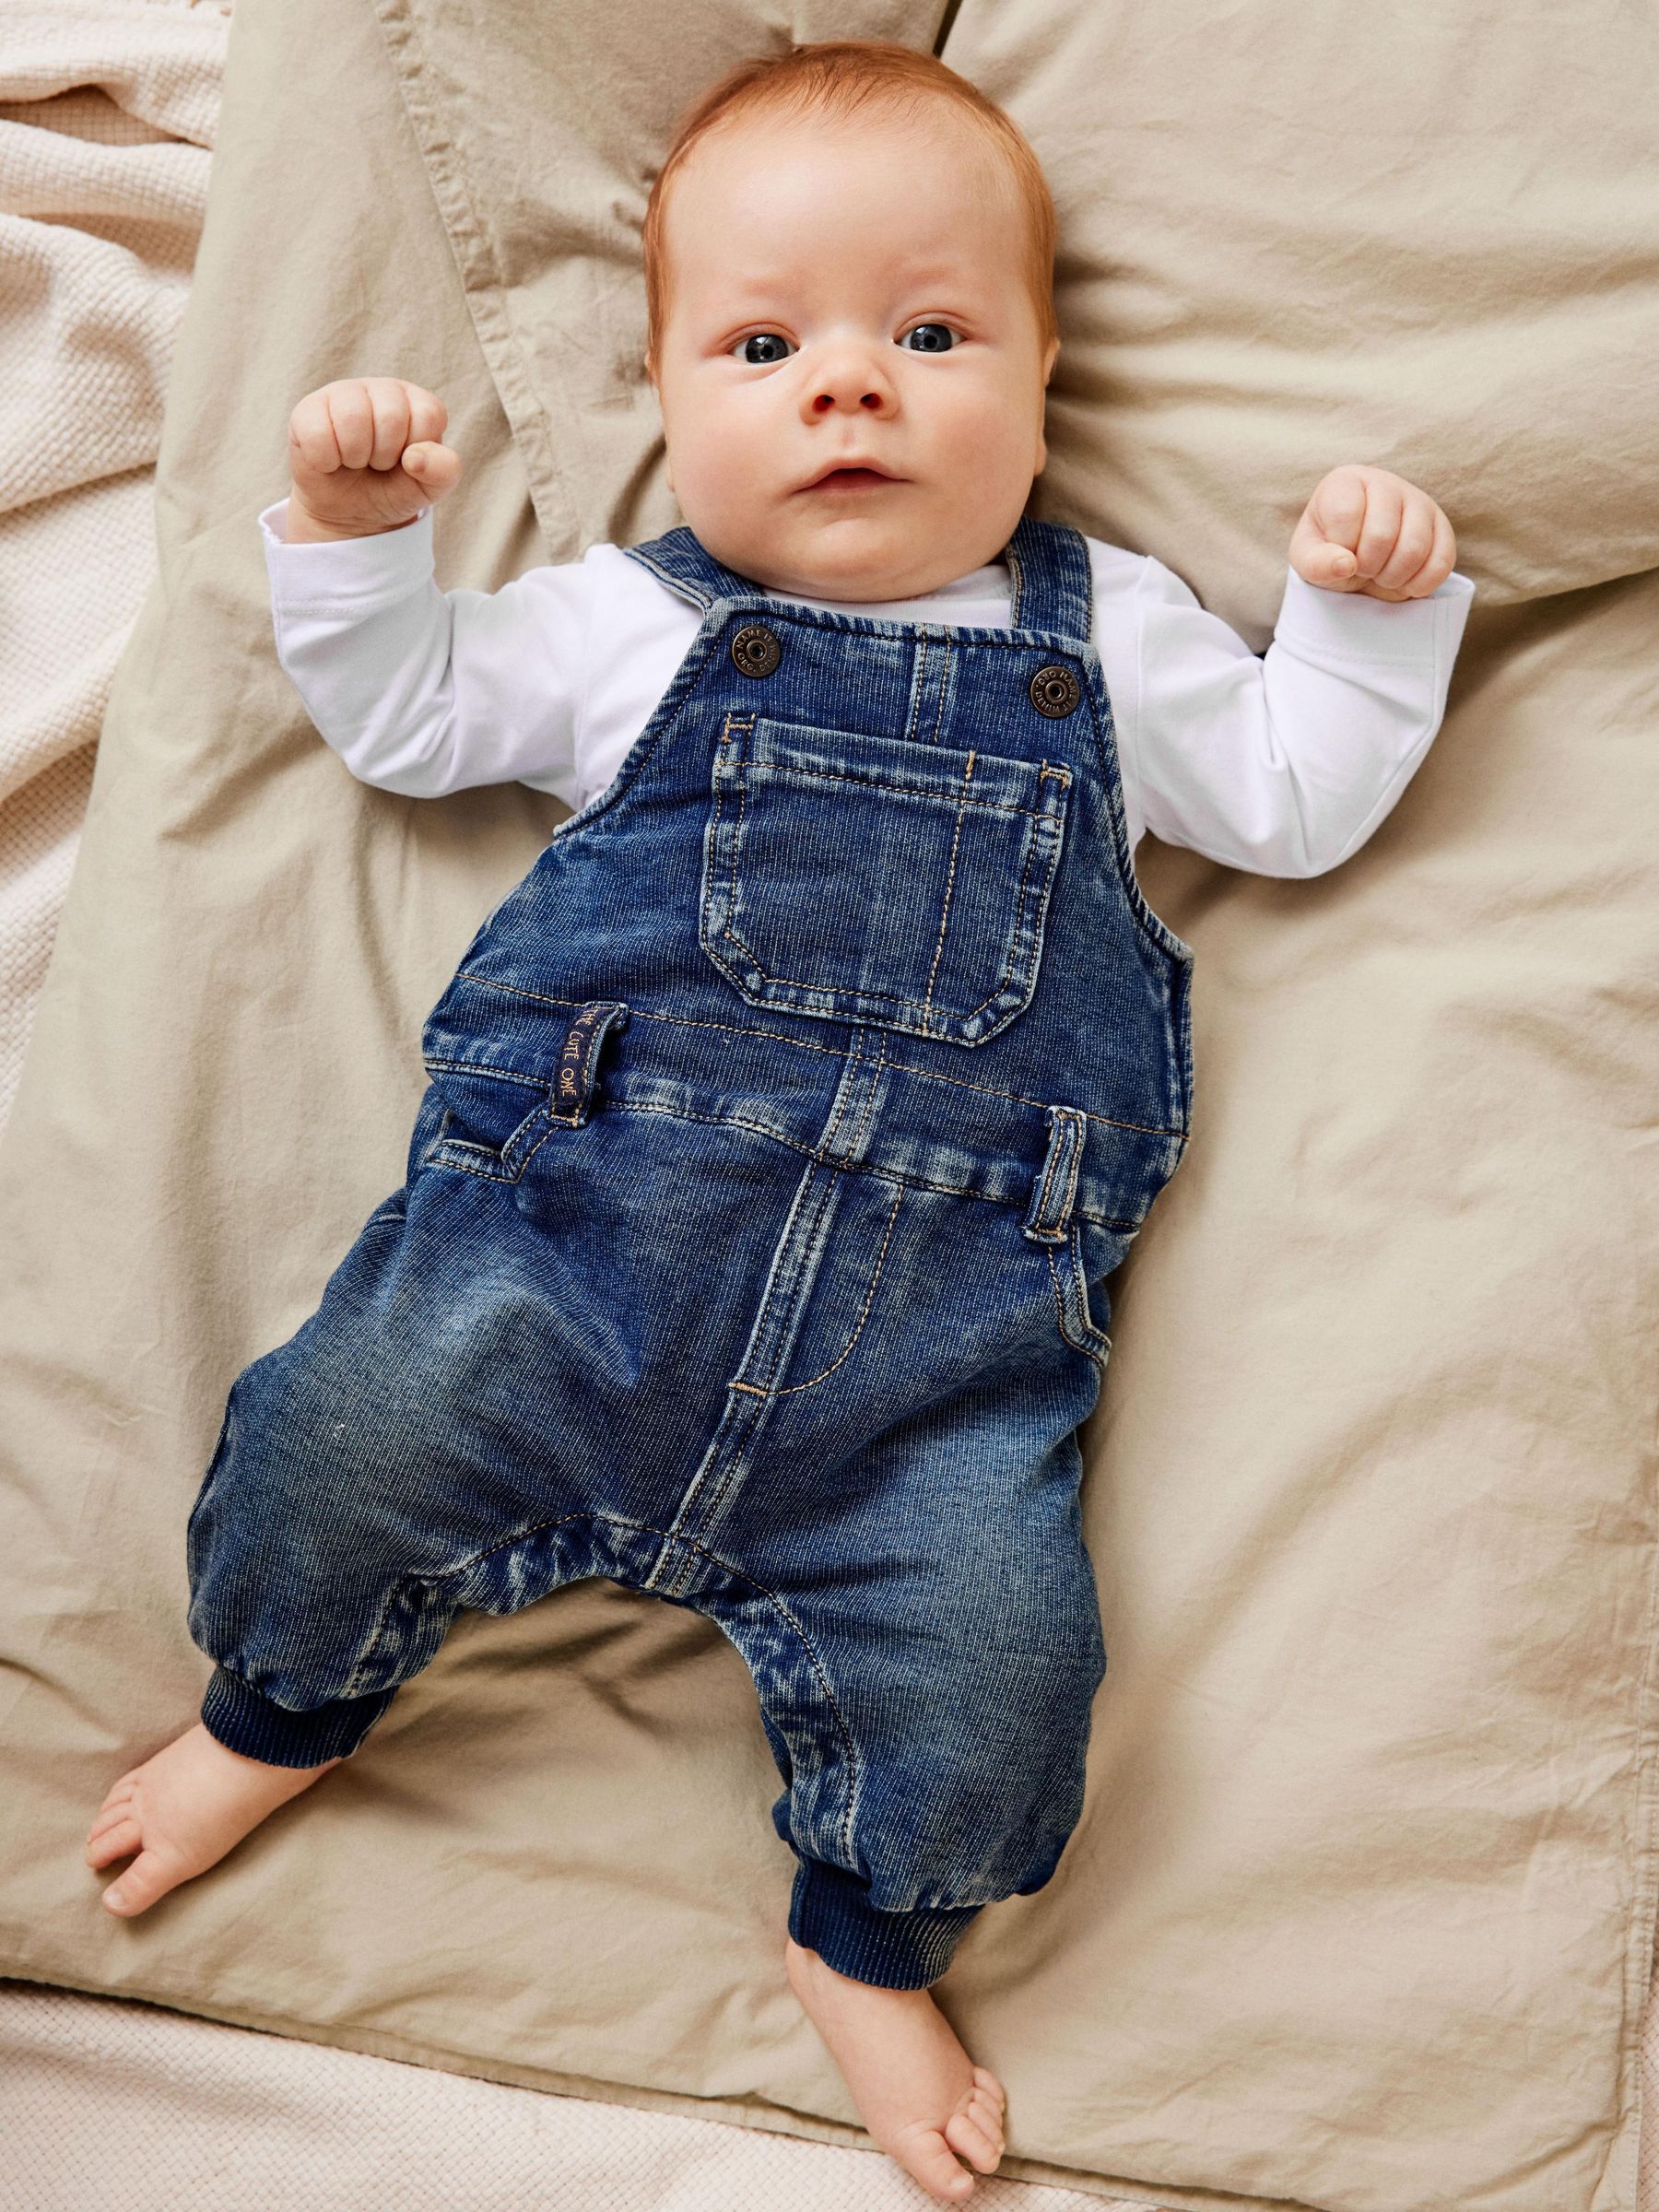 Children Toddler Kids Infant Baby Boys Girls Cute Denim Overalls Suspender  Pants Outfits Clothes Chargers Football Sweatpants (Blue, 2-3 Years) :  Amazon.ca: Clothing, Shoes & Accessories